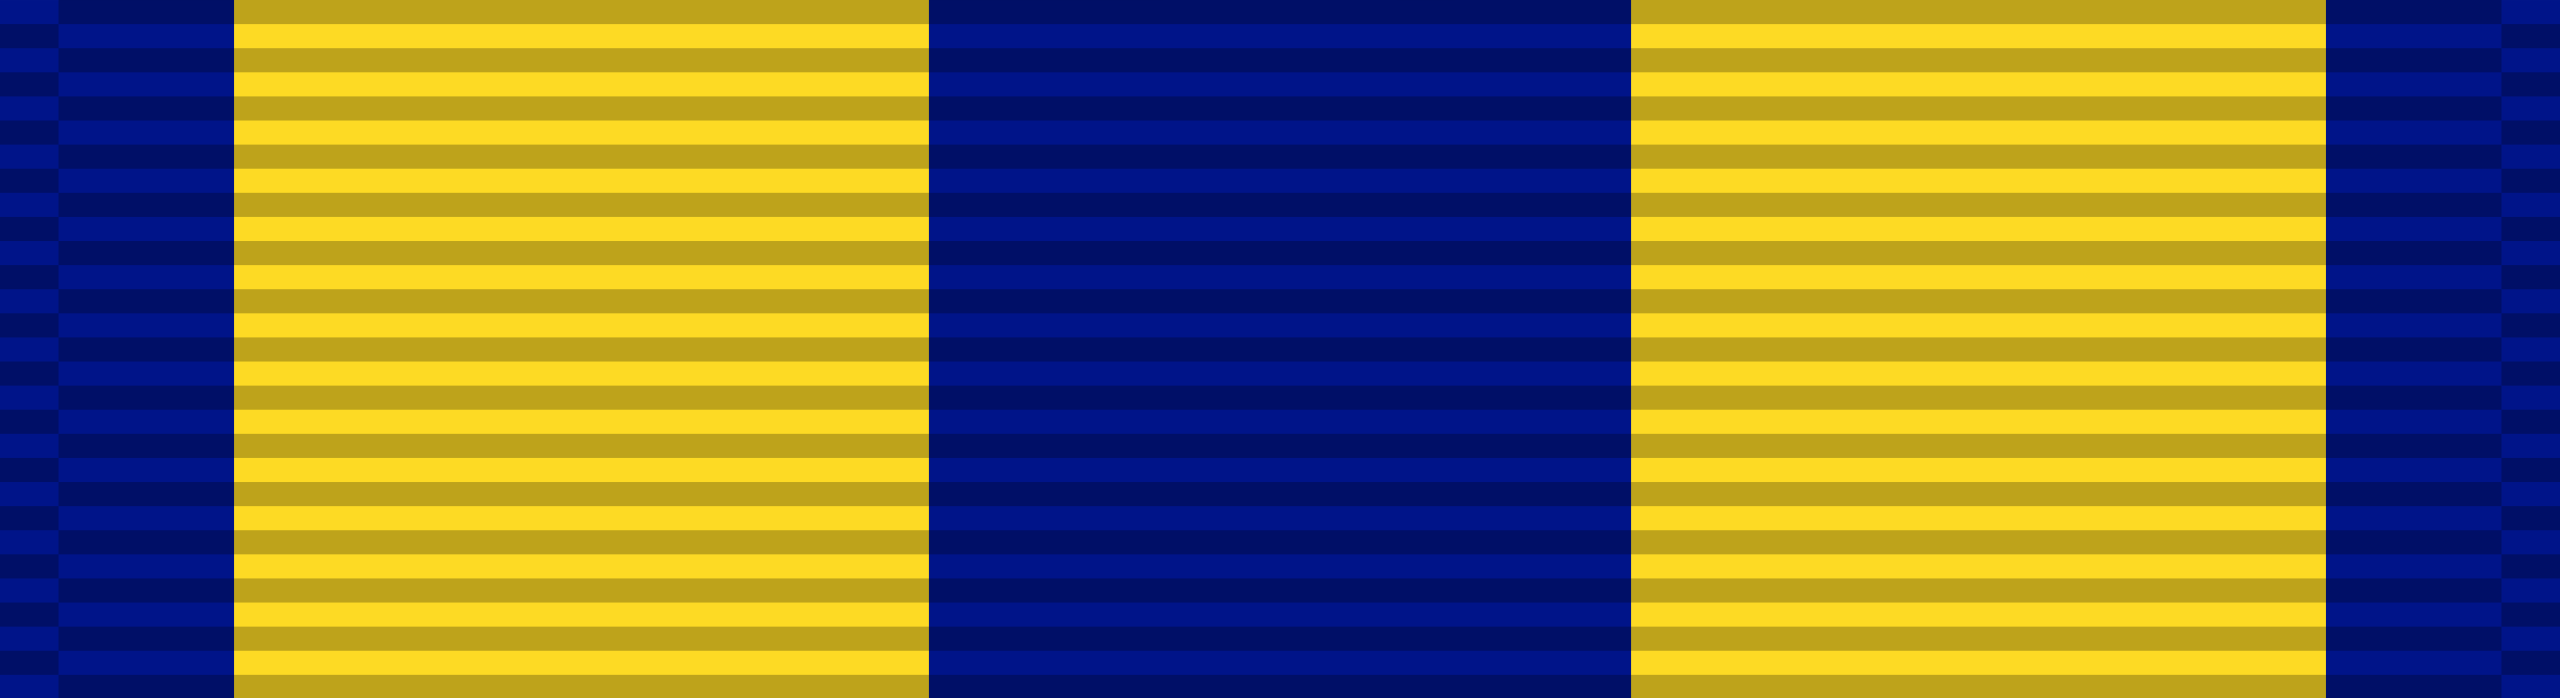 Navy Expeditionary Medal